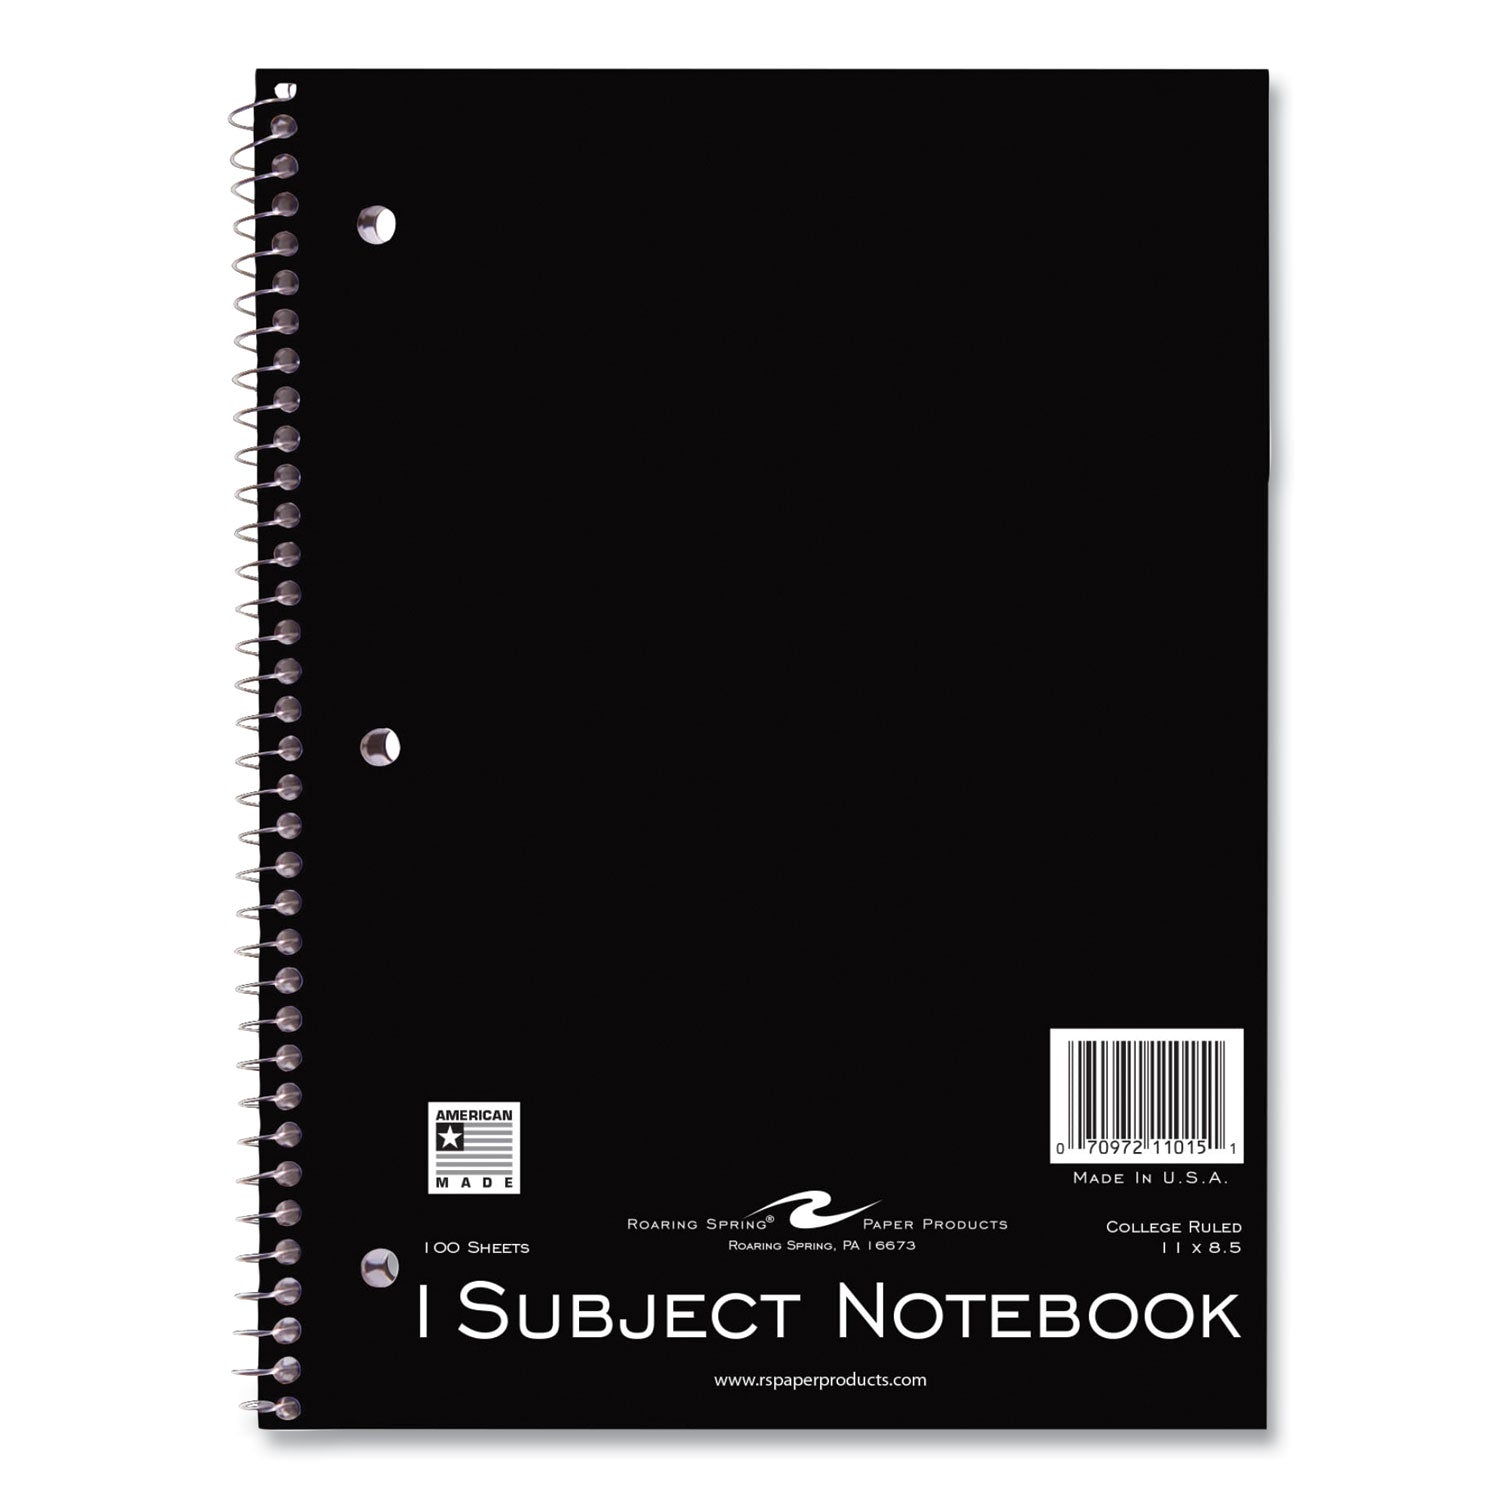 wirebound-notebook-1-subject-med-college-rule-randomly-asst-cover-100-11x85-sheets-24-ct-ships-in-4-6-bus-days_roa11015cs - 2